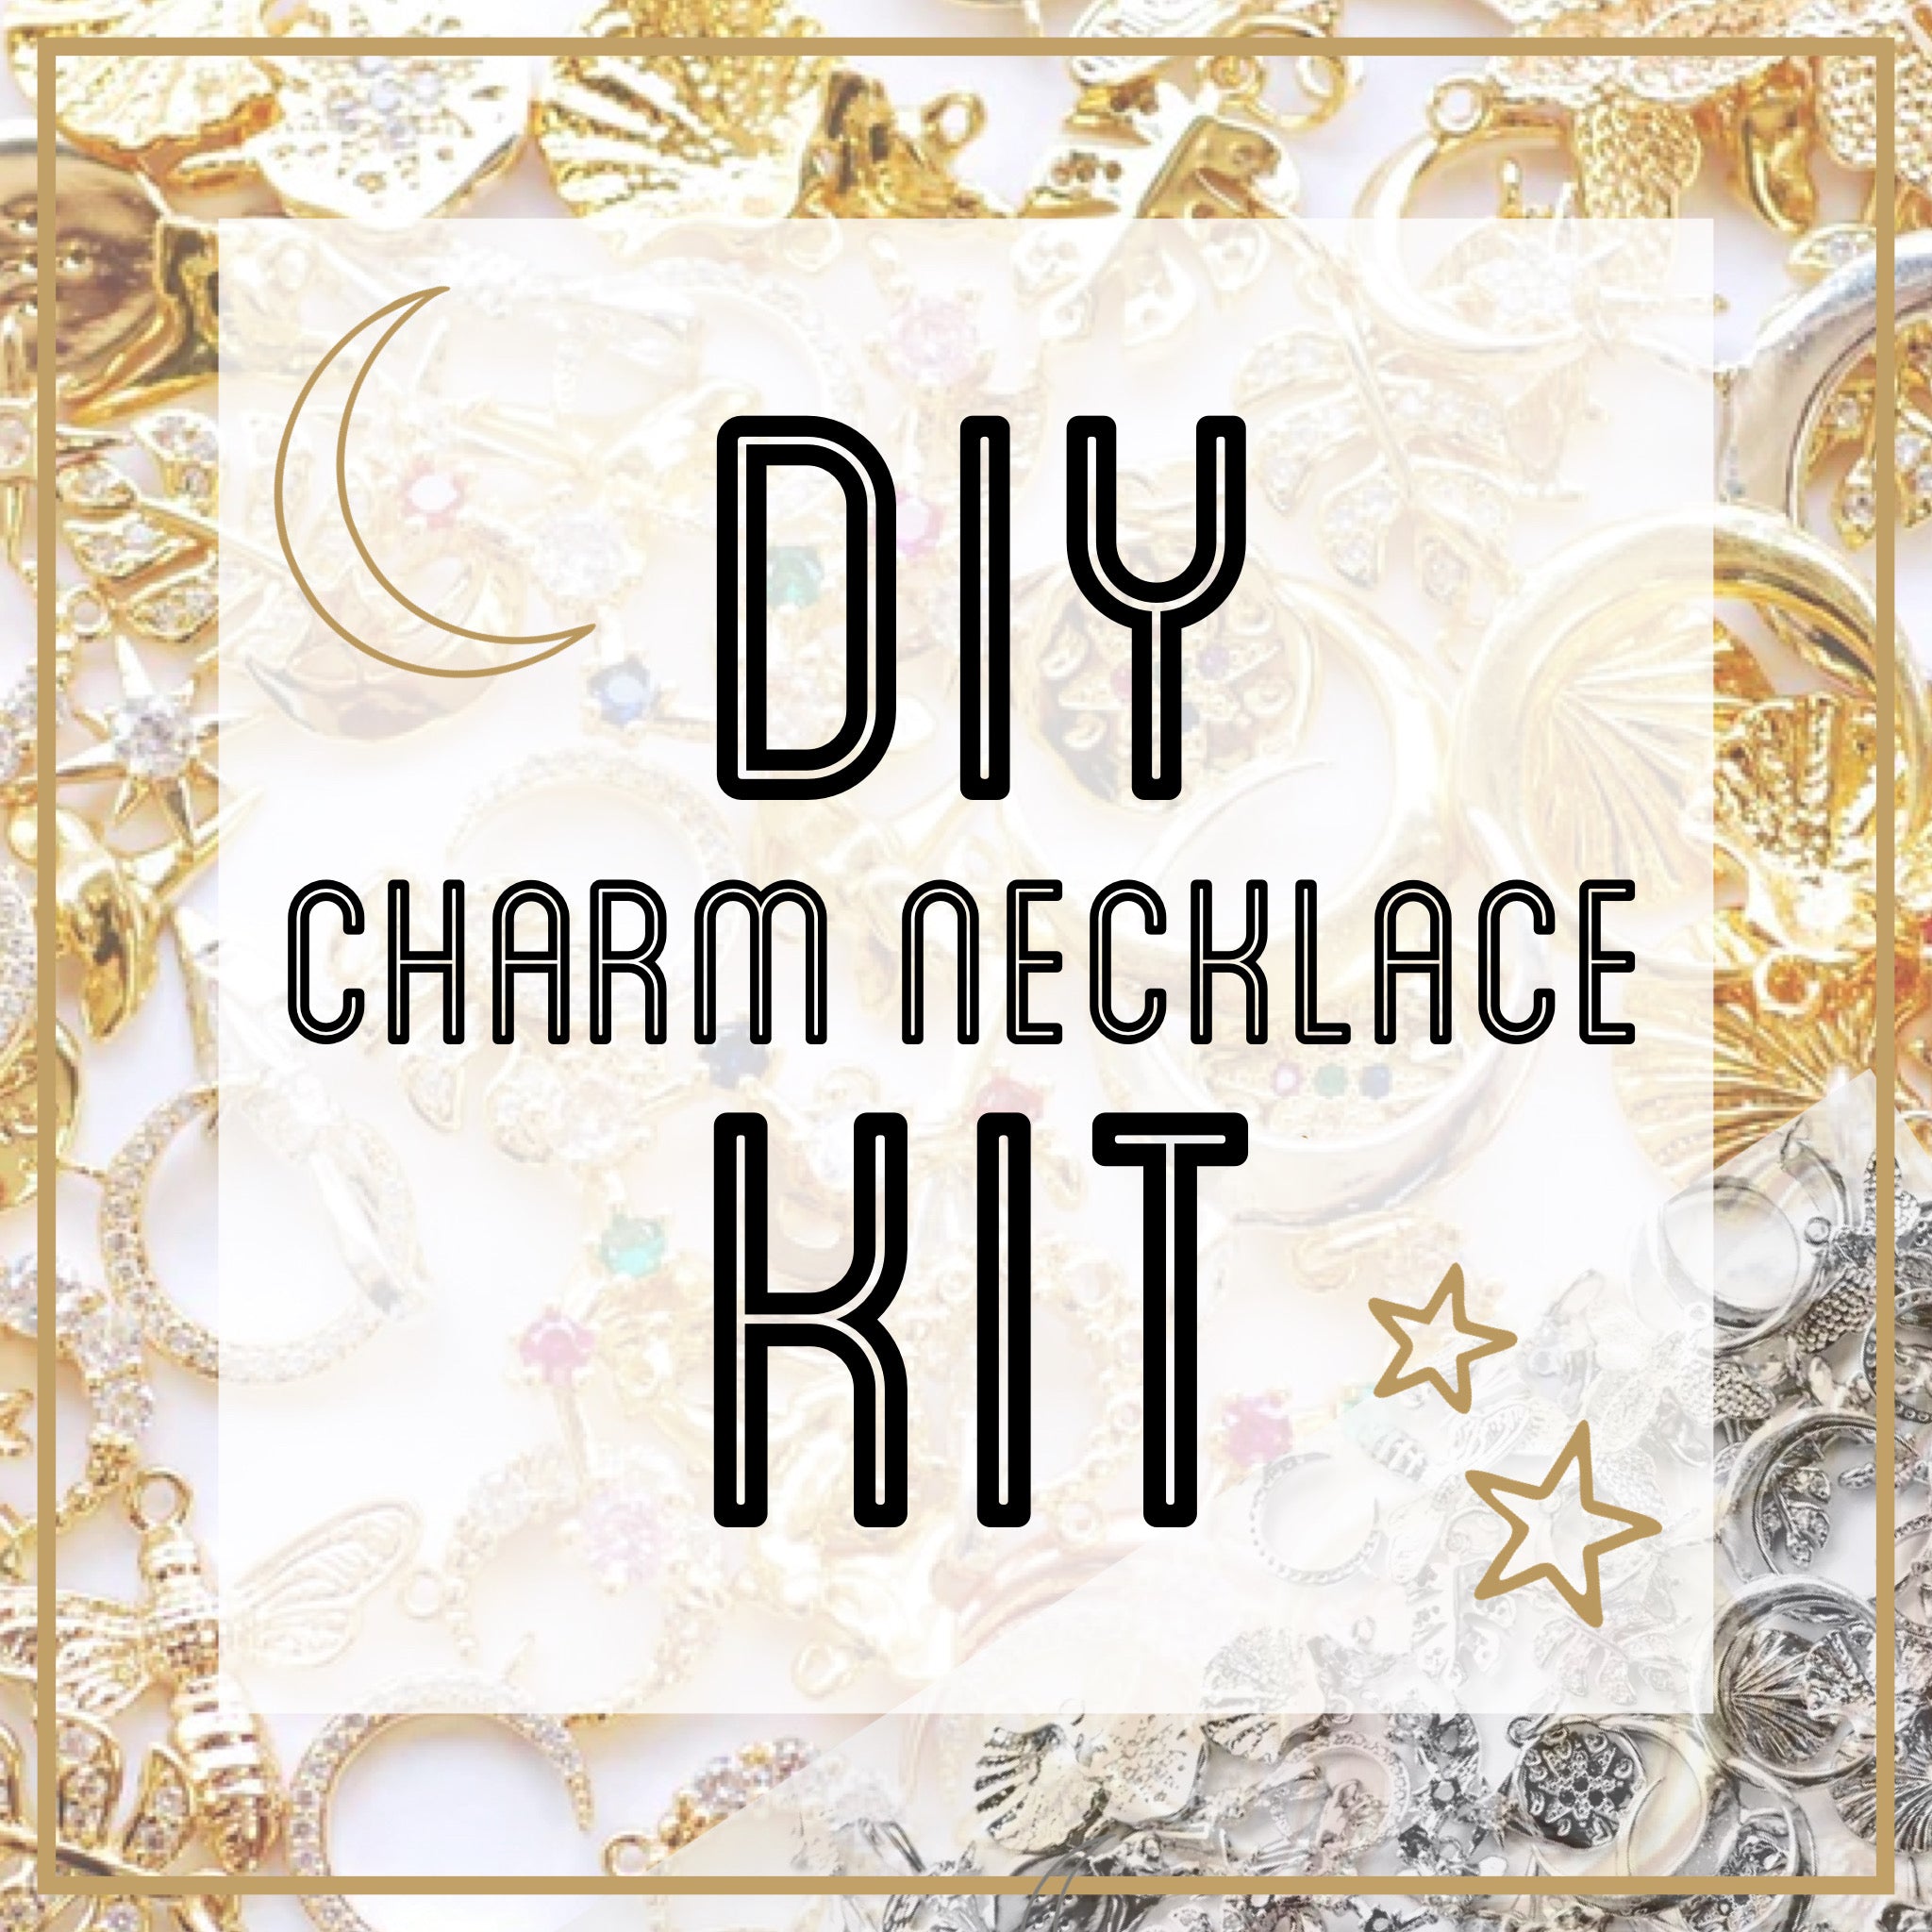 (at home) DIY Charm Necklace KIT